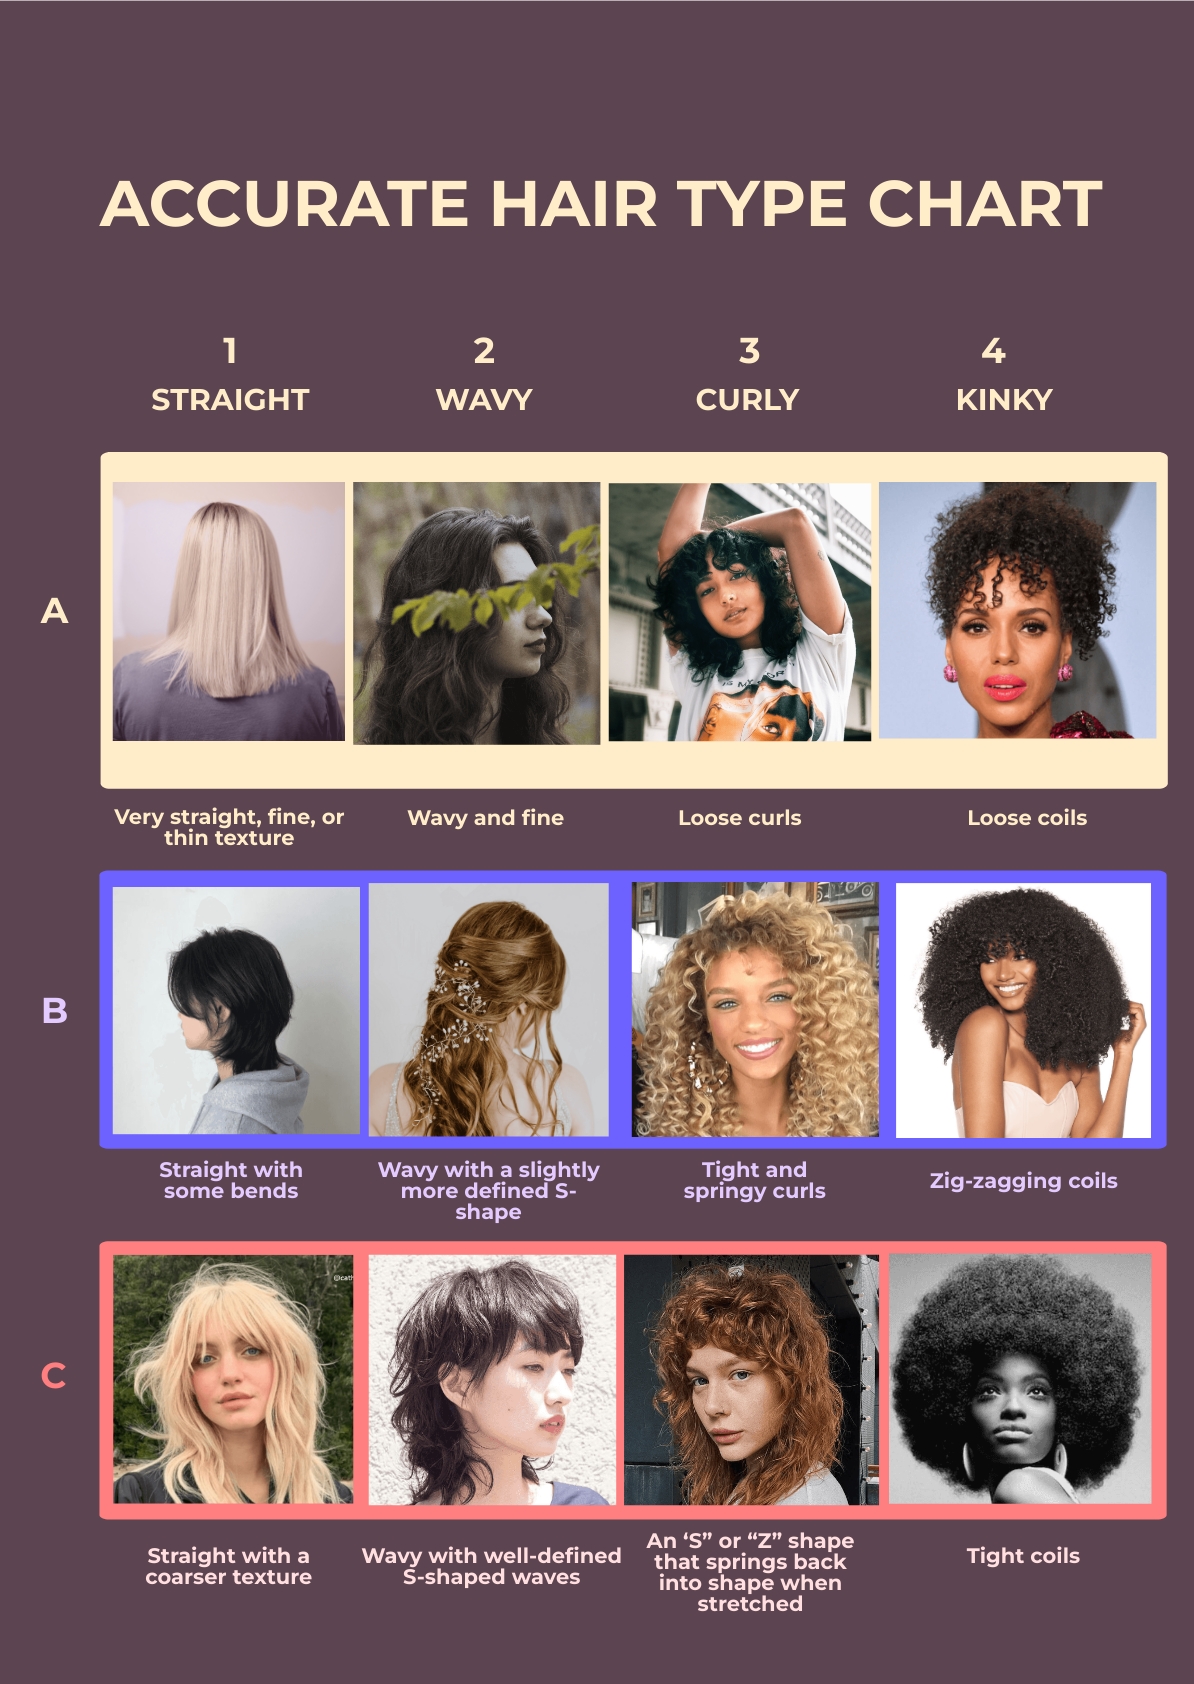 Free Mixed Hair Type Chart - Download in PDF, Illustrator | Template.net